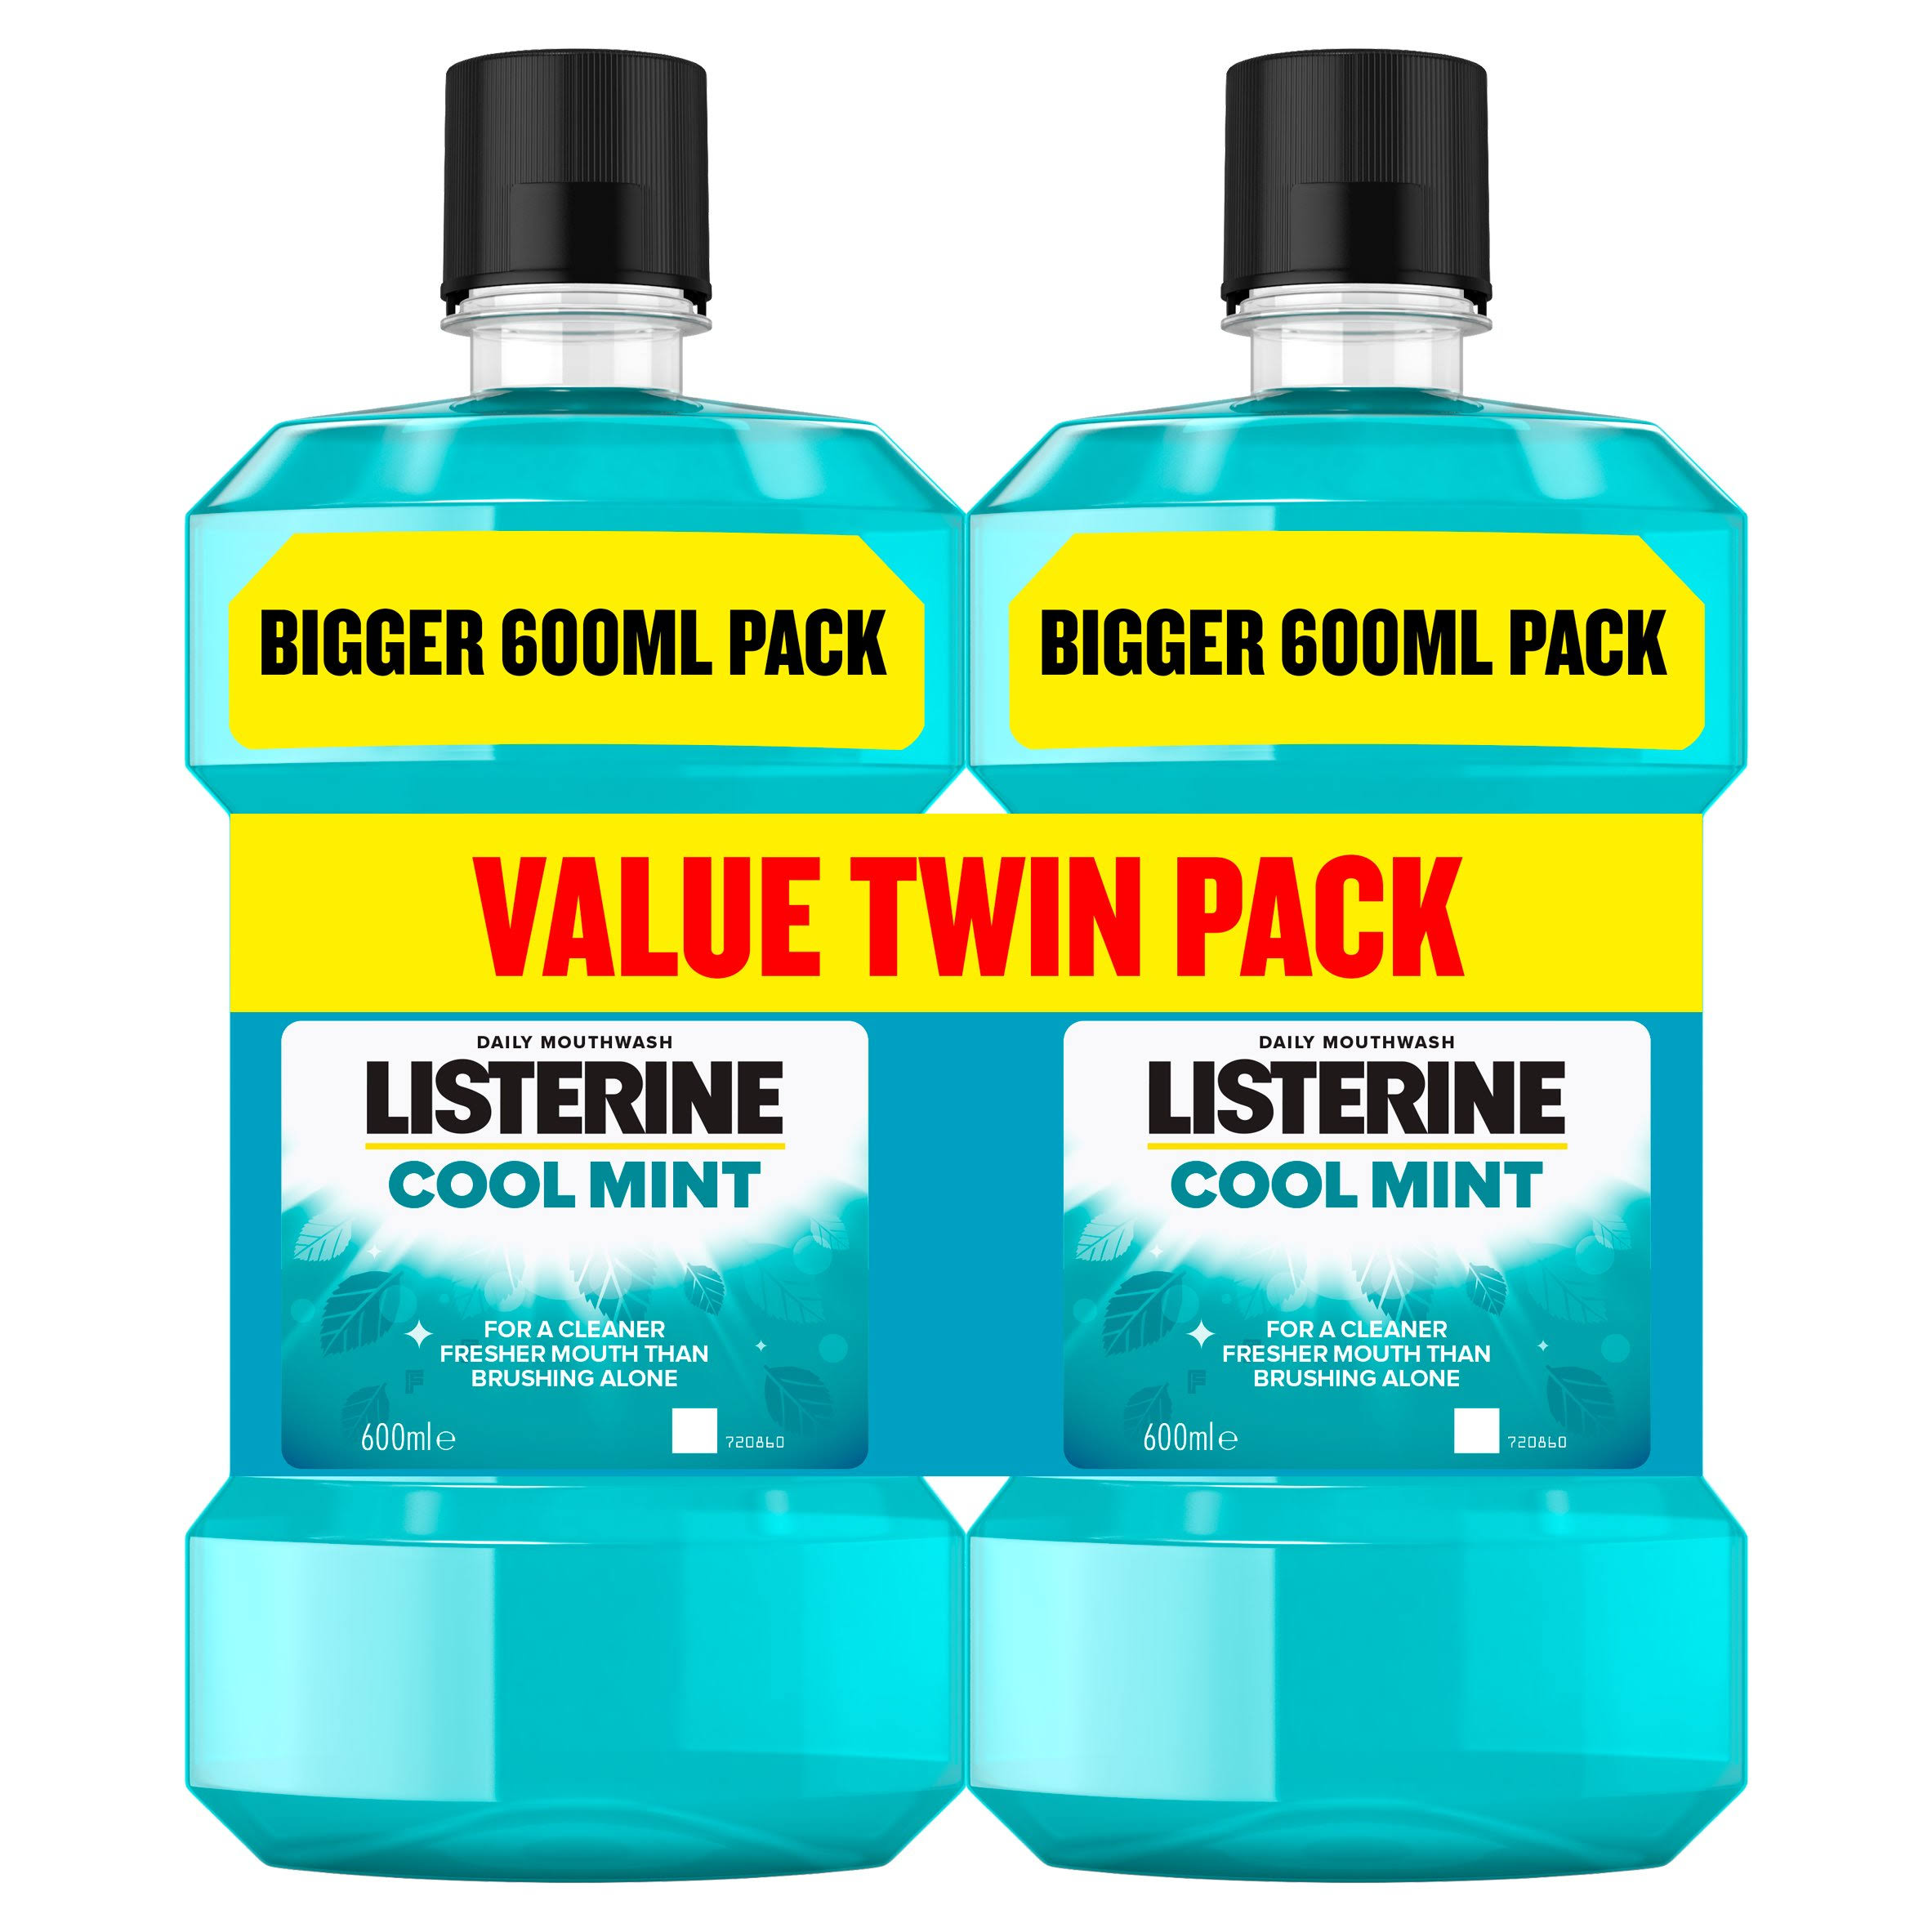 Listerine Cool Mint Daily Mouthwash Value Twin Pack 600ml by dpharmacy